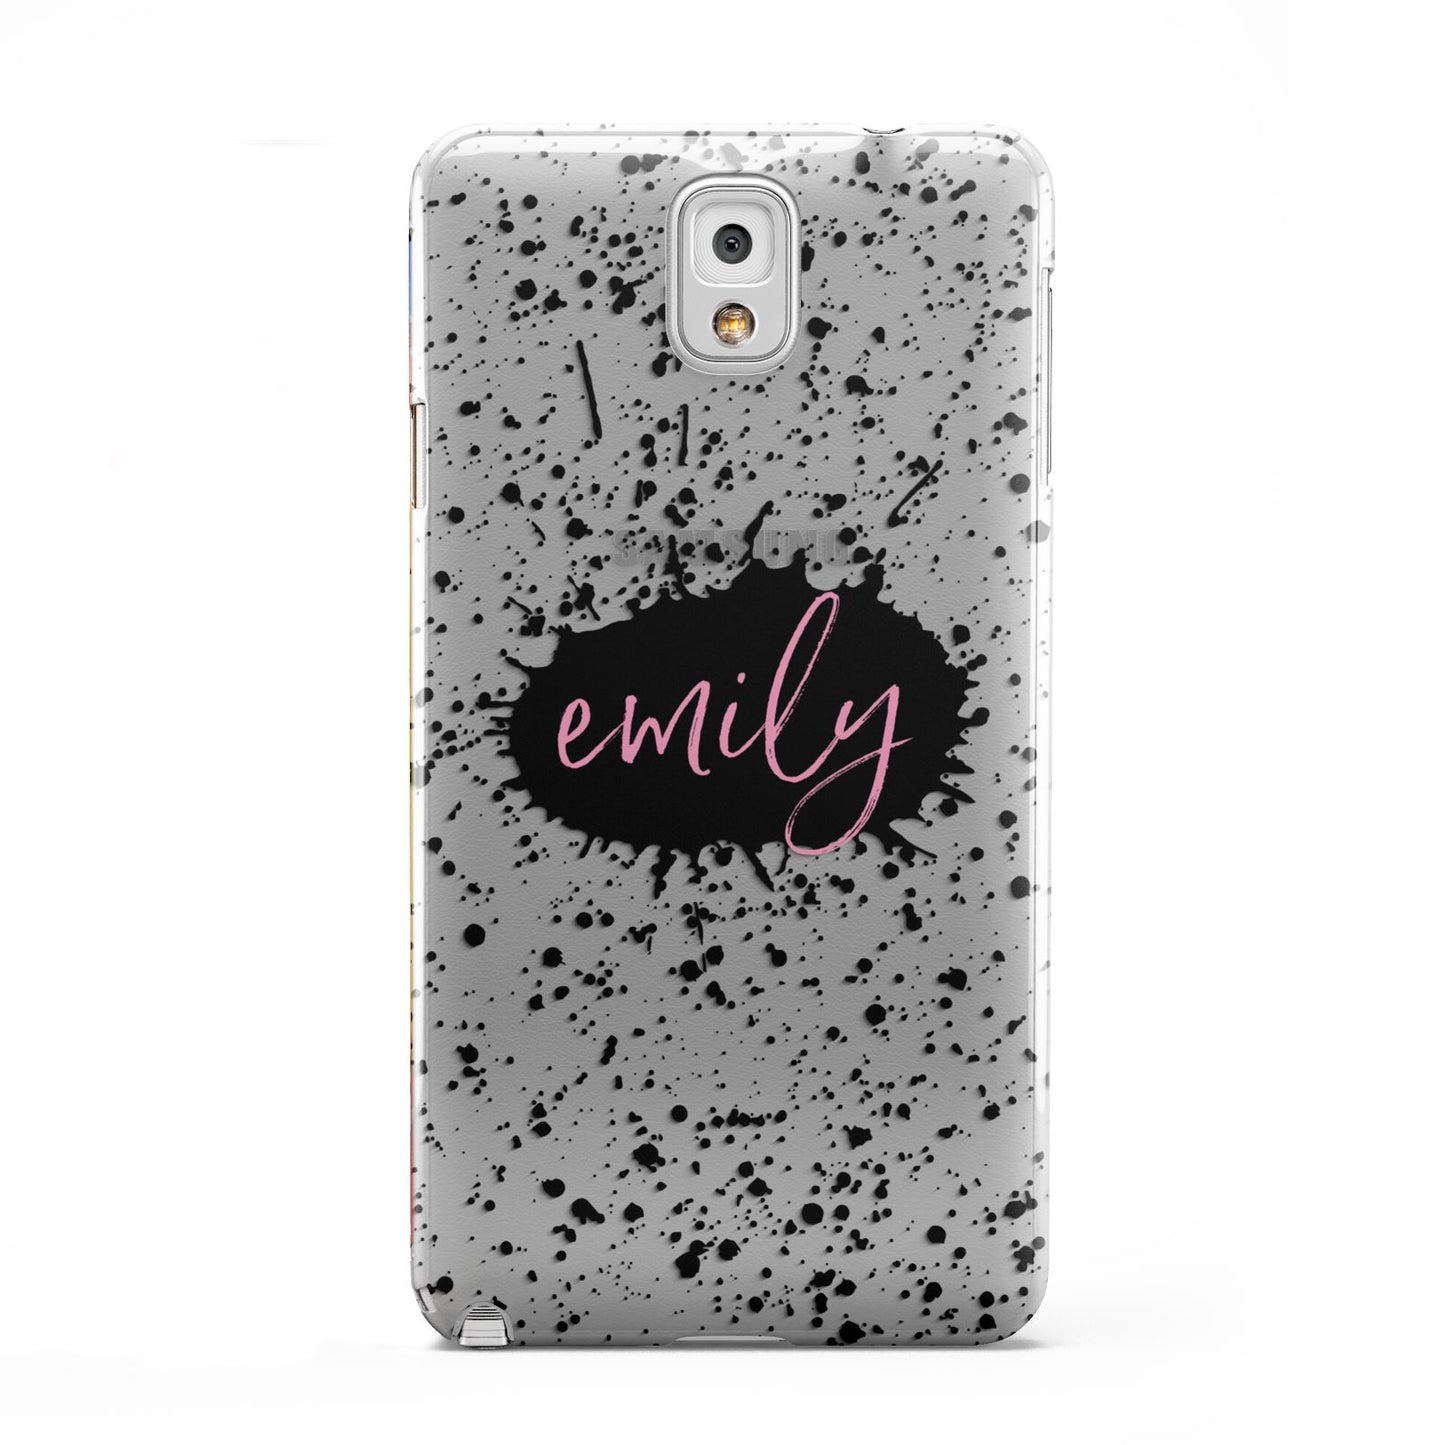 Personalised Black Ink Splat Clear Name Samsung Galaxy Note 3 Case